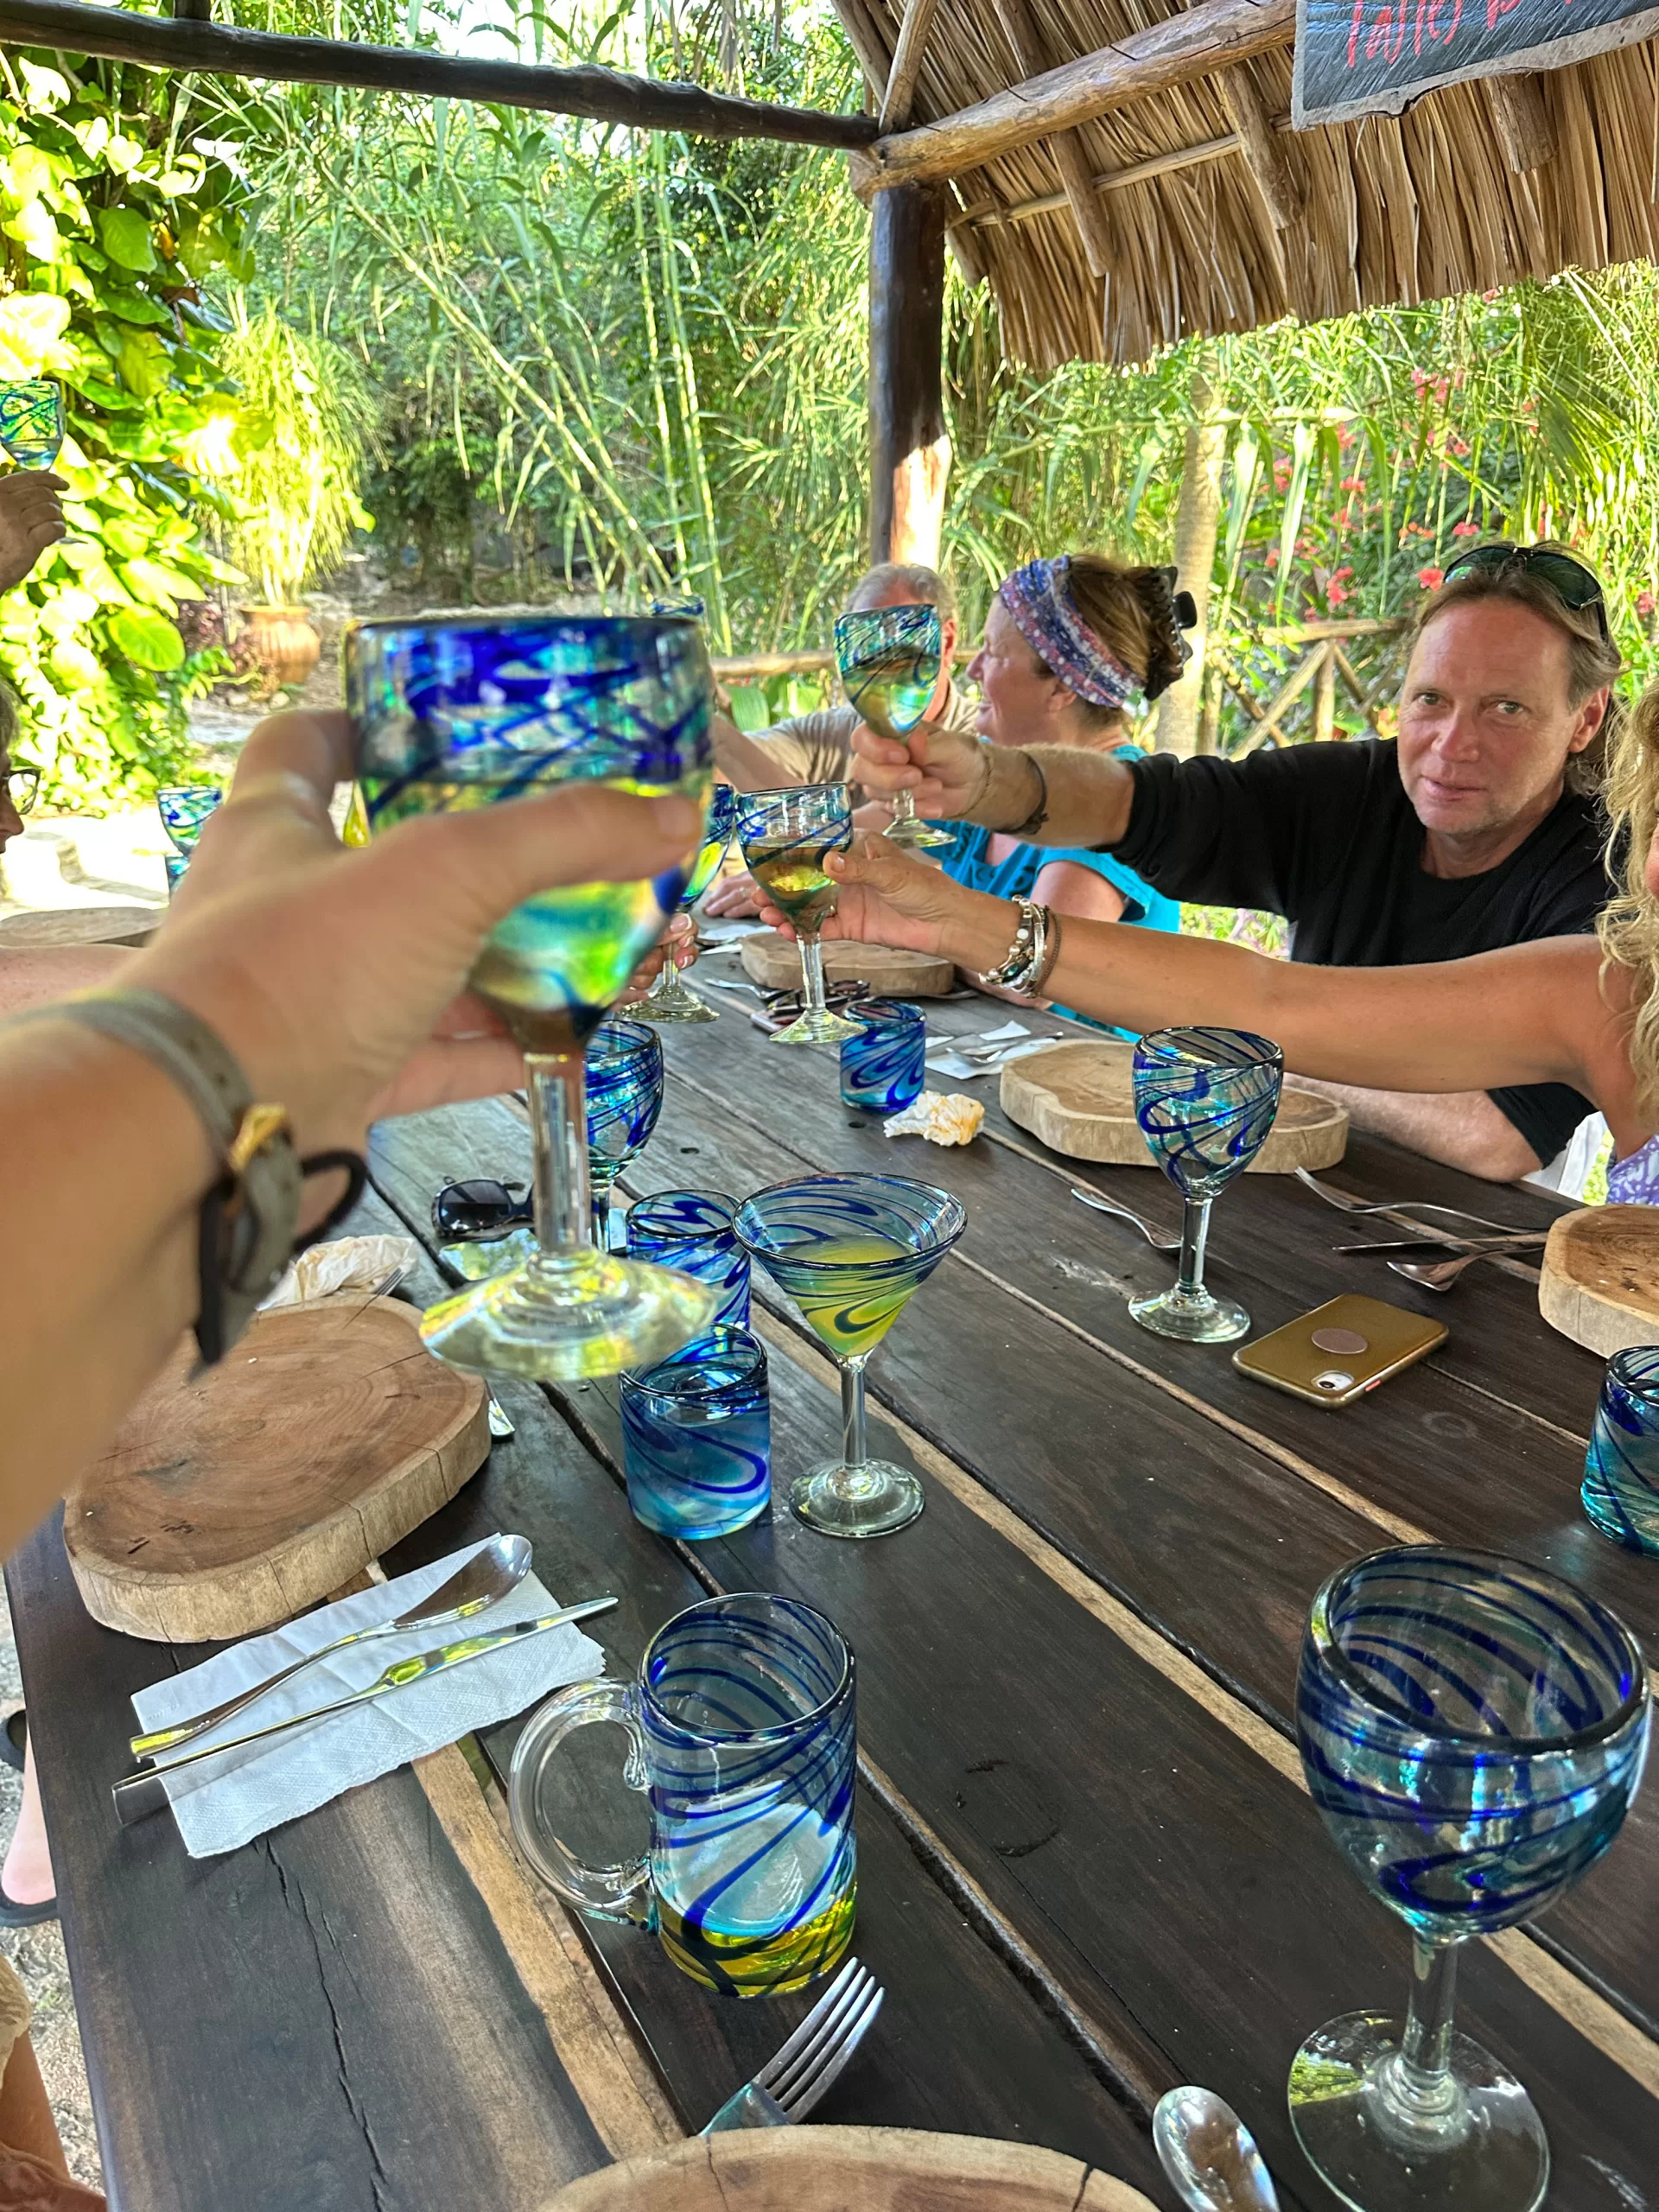 Several visitors raising their glasses in a toast.